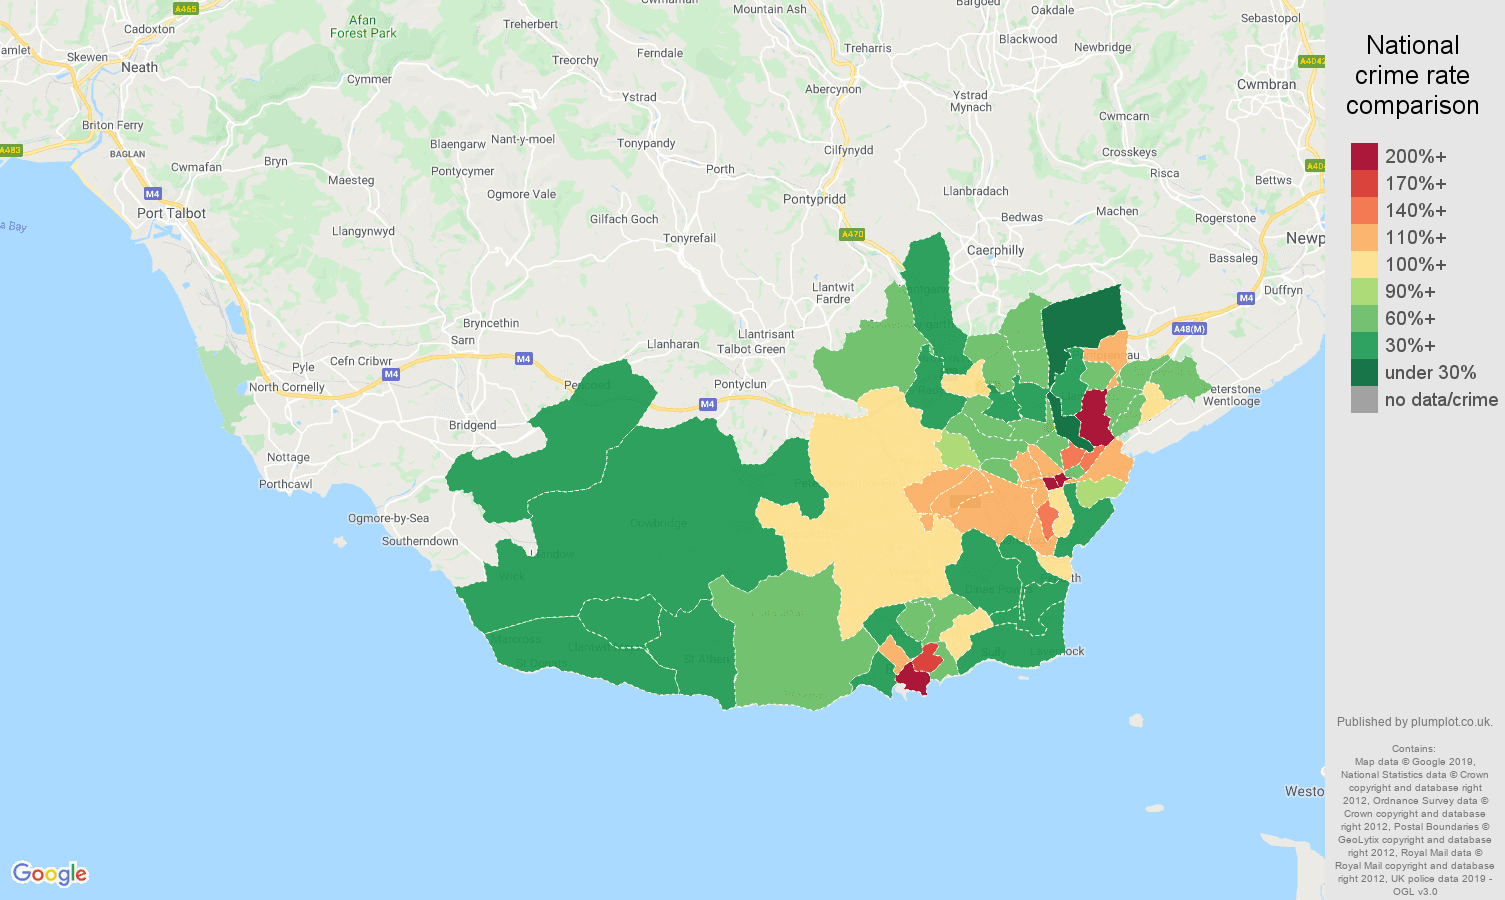 South Glamorgan other theft crime rate comparison map